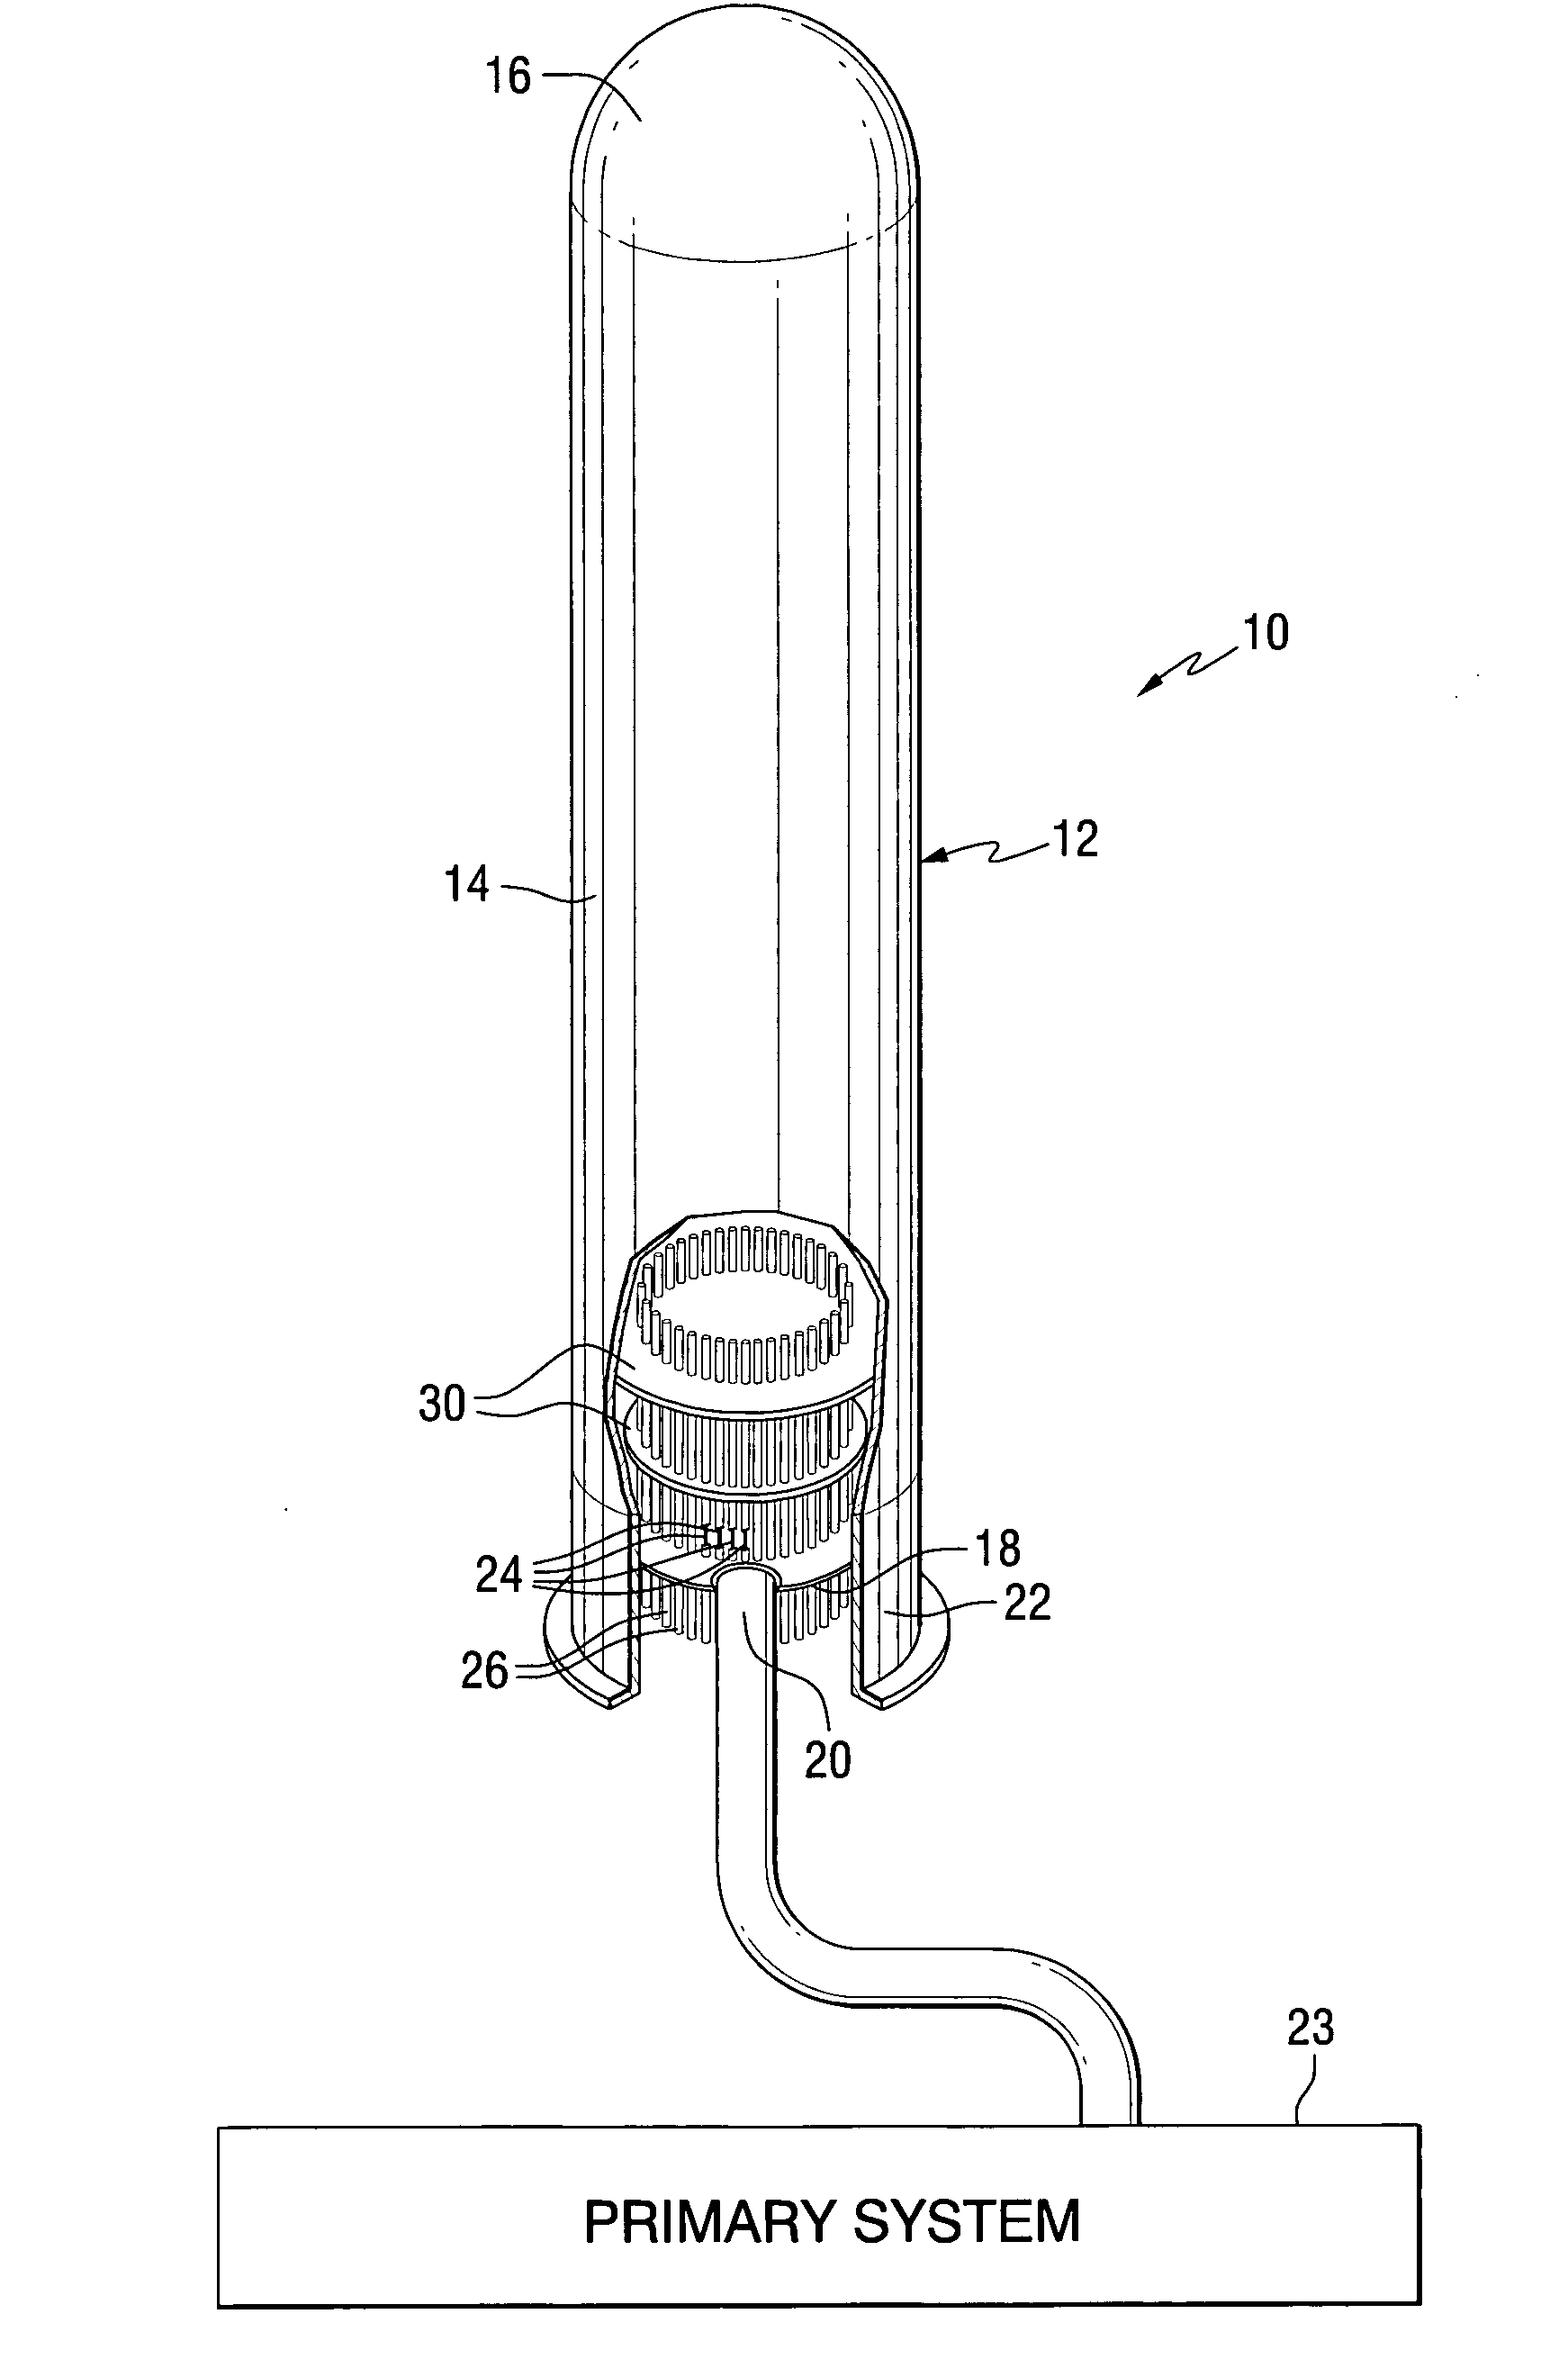 Method of forming a weld pad